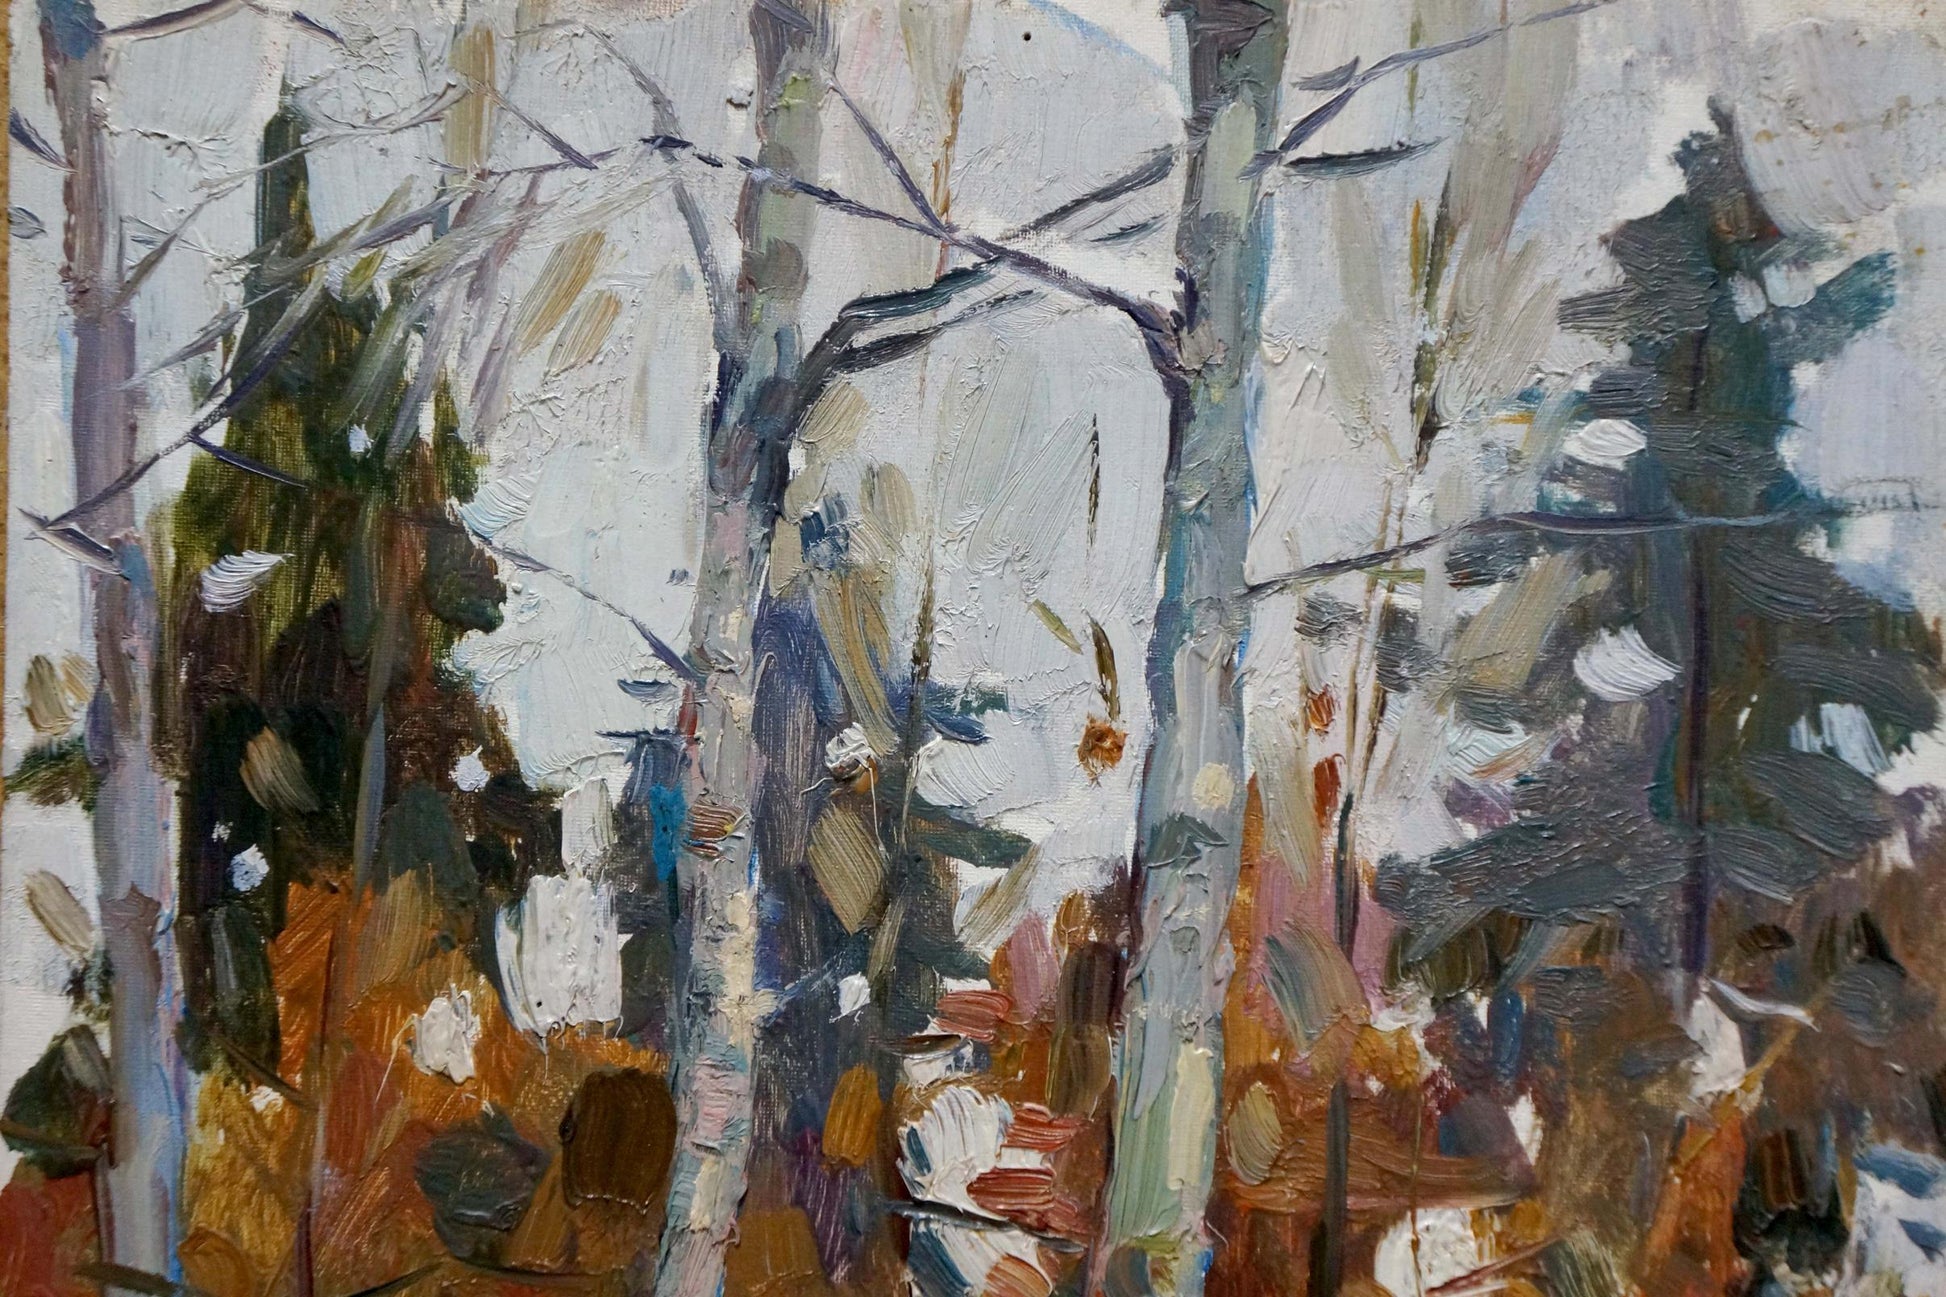 The oil painting by Mikhail Saulovich Turovsky features a forest setting